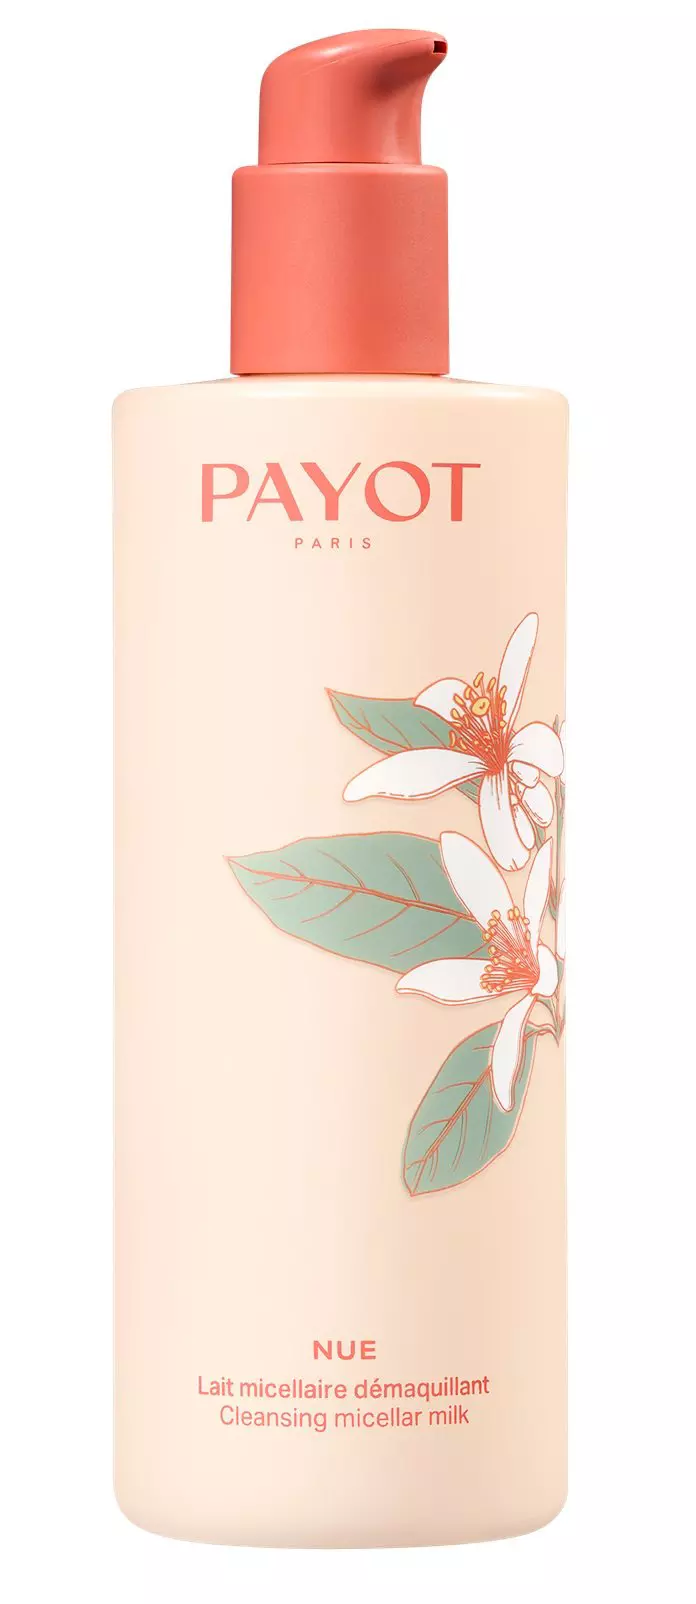 Payot Payot Nue Cleansing Micellar Milk